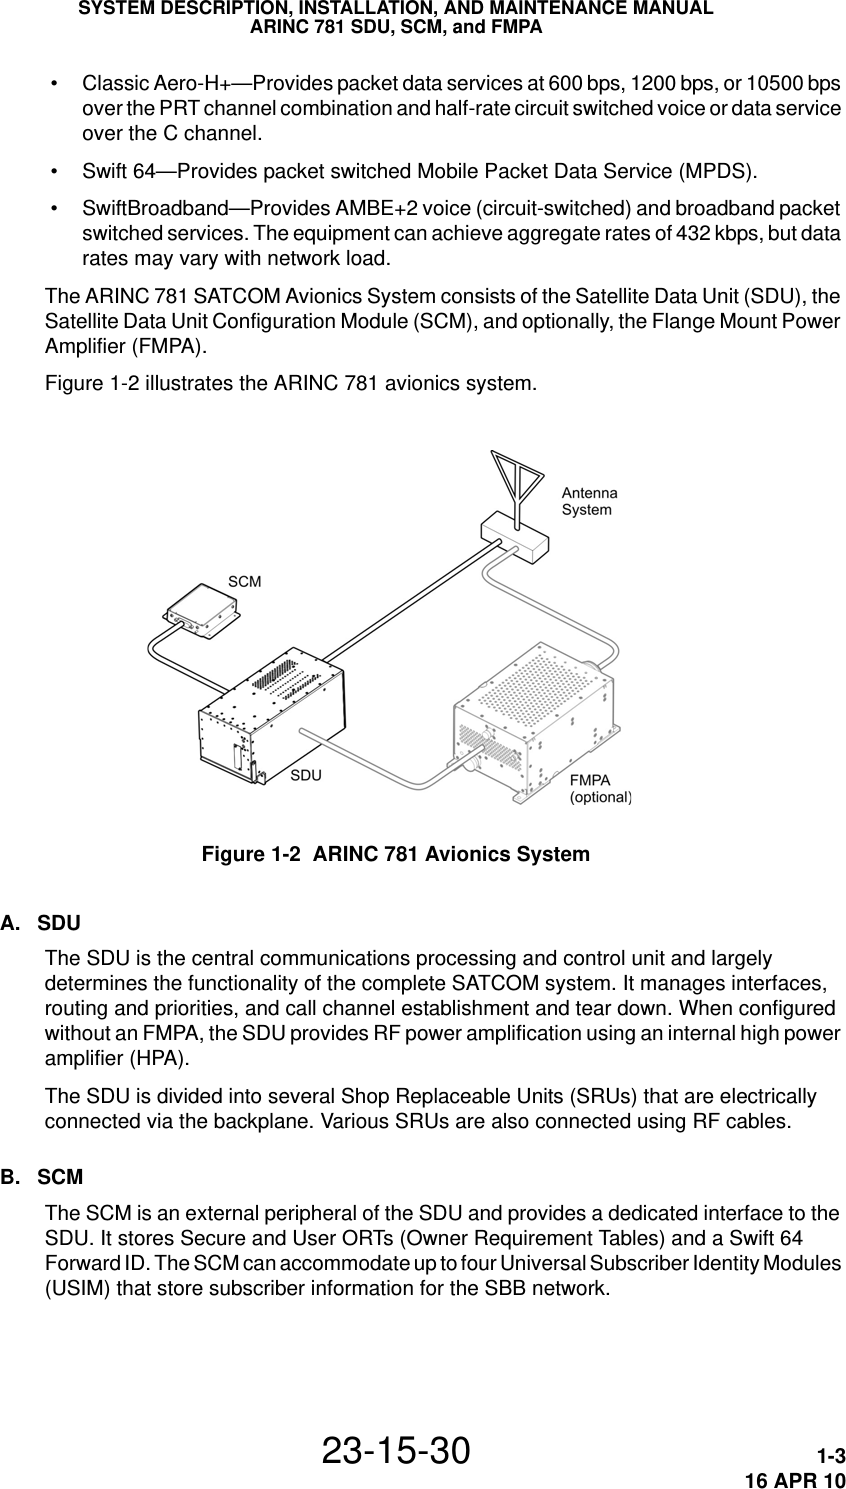 SYSTEM DESCRIPTION, INSTALLATION, AND MAINTENANCE MANUALARINC 781 SDU, SCM, and FMPA23-15-30 1-316 APR 10 • Classic Aero-H+—Provides packet data services at 600 bps, 1200 bps, or 10500 bps over the PRT channel combination and half-rate circuit switched voice or data service over the C channel. • Swift 64—Provides packet switched Mobile Packet Data Service (MPDS). • SwiftBroadband—Provides AMBE+2 voice (circuit-switched) and broadband packet switched services. The equipment can achieve aggregate rates of 432 kbps, but data rates may vary with network load.The ARINC 781 SATCOM Avionics System consists of the Satellite Data Unit (SDU), the Satellite Data Unit Configuration Module (SCM), and optionally, the Flange Mount Power Amplifier (FMPA). Figure 1-2 illustrates the ARINC 781 avionics system.Figure 1-2  ARINC 781 Avionics SystemA. SDUThe SDU is the central communications processing and control unit and largely determines the functionality of the complete SATCOM system. It manages interfaces, routing and priorities, and call channel establishment and tear down. When configured without an FMPA, the SDU provides RF power amplification using an internal high power amplifier (HPA).The SDU is divided into several Shop Replaceable Units (SRUs) that are electrically connected via the backplane. Various SRUs are also connected using RF cables. B. SCMThe SCM is an external peripheral of the SDU and provides a dedicated interface to the SDU. It stores Secure and User ORTs (Owner Requirement Tables) and a Swift 64 Forward ID. The SCM can accommodate up to four Universal Subscriber Identity Modules (USIM) that store subscriber information for the SBB network.